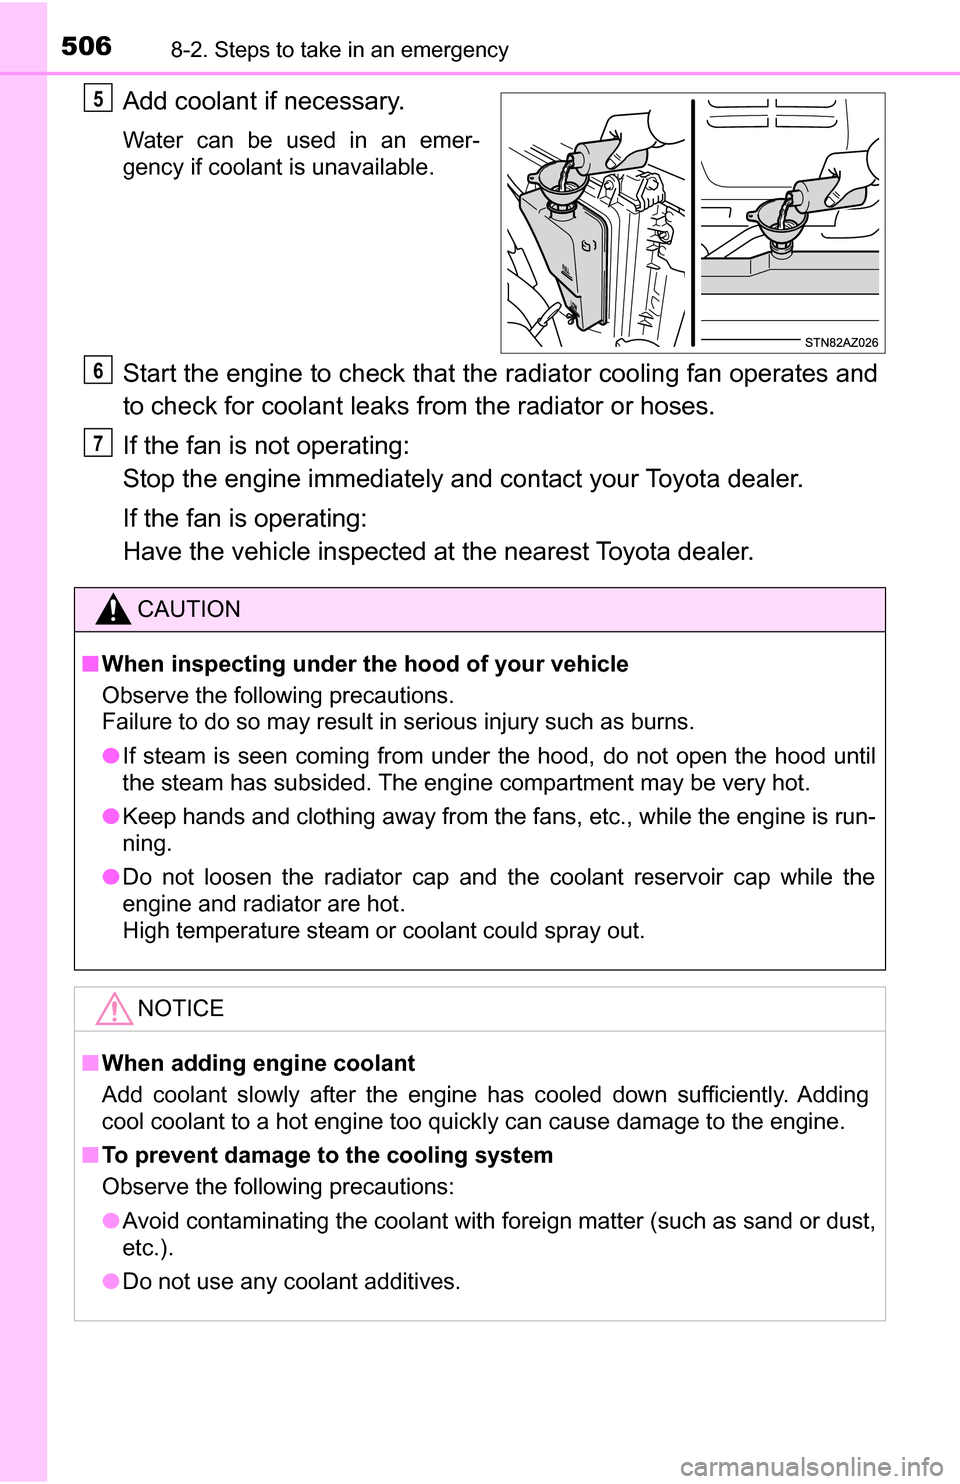 TOYOTA TUNDRA 2016 2.G Owners Manual 5068-2. Steps to take in an emergency
Add coolant if necessary.
Water can be used in an emer-
gency if coolant is unavailable.
Start the engine to check that the radiator cooling fan operates and
to c